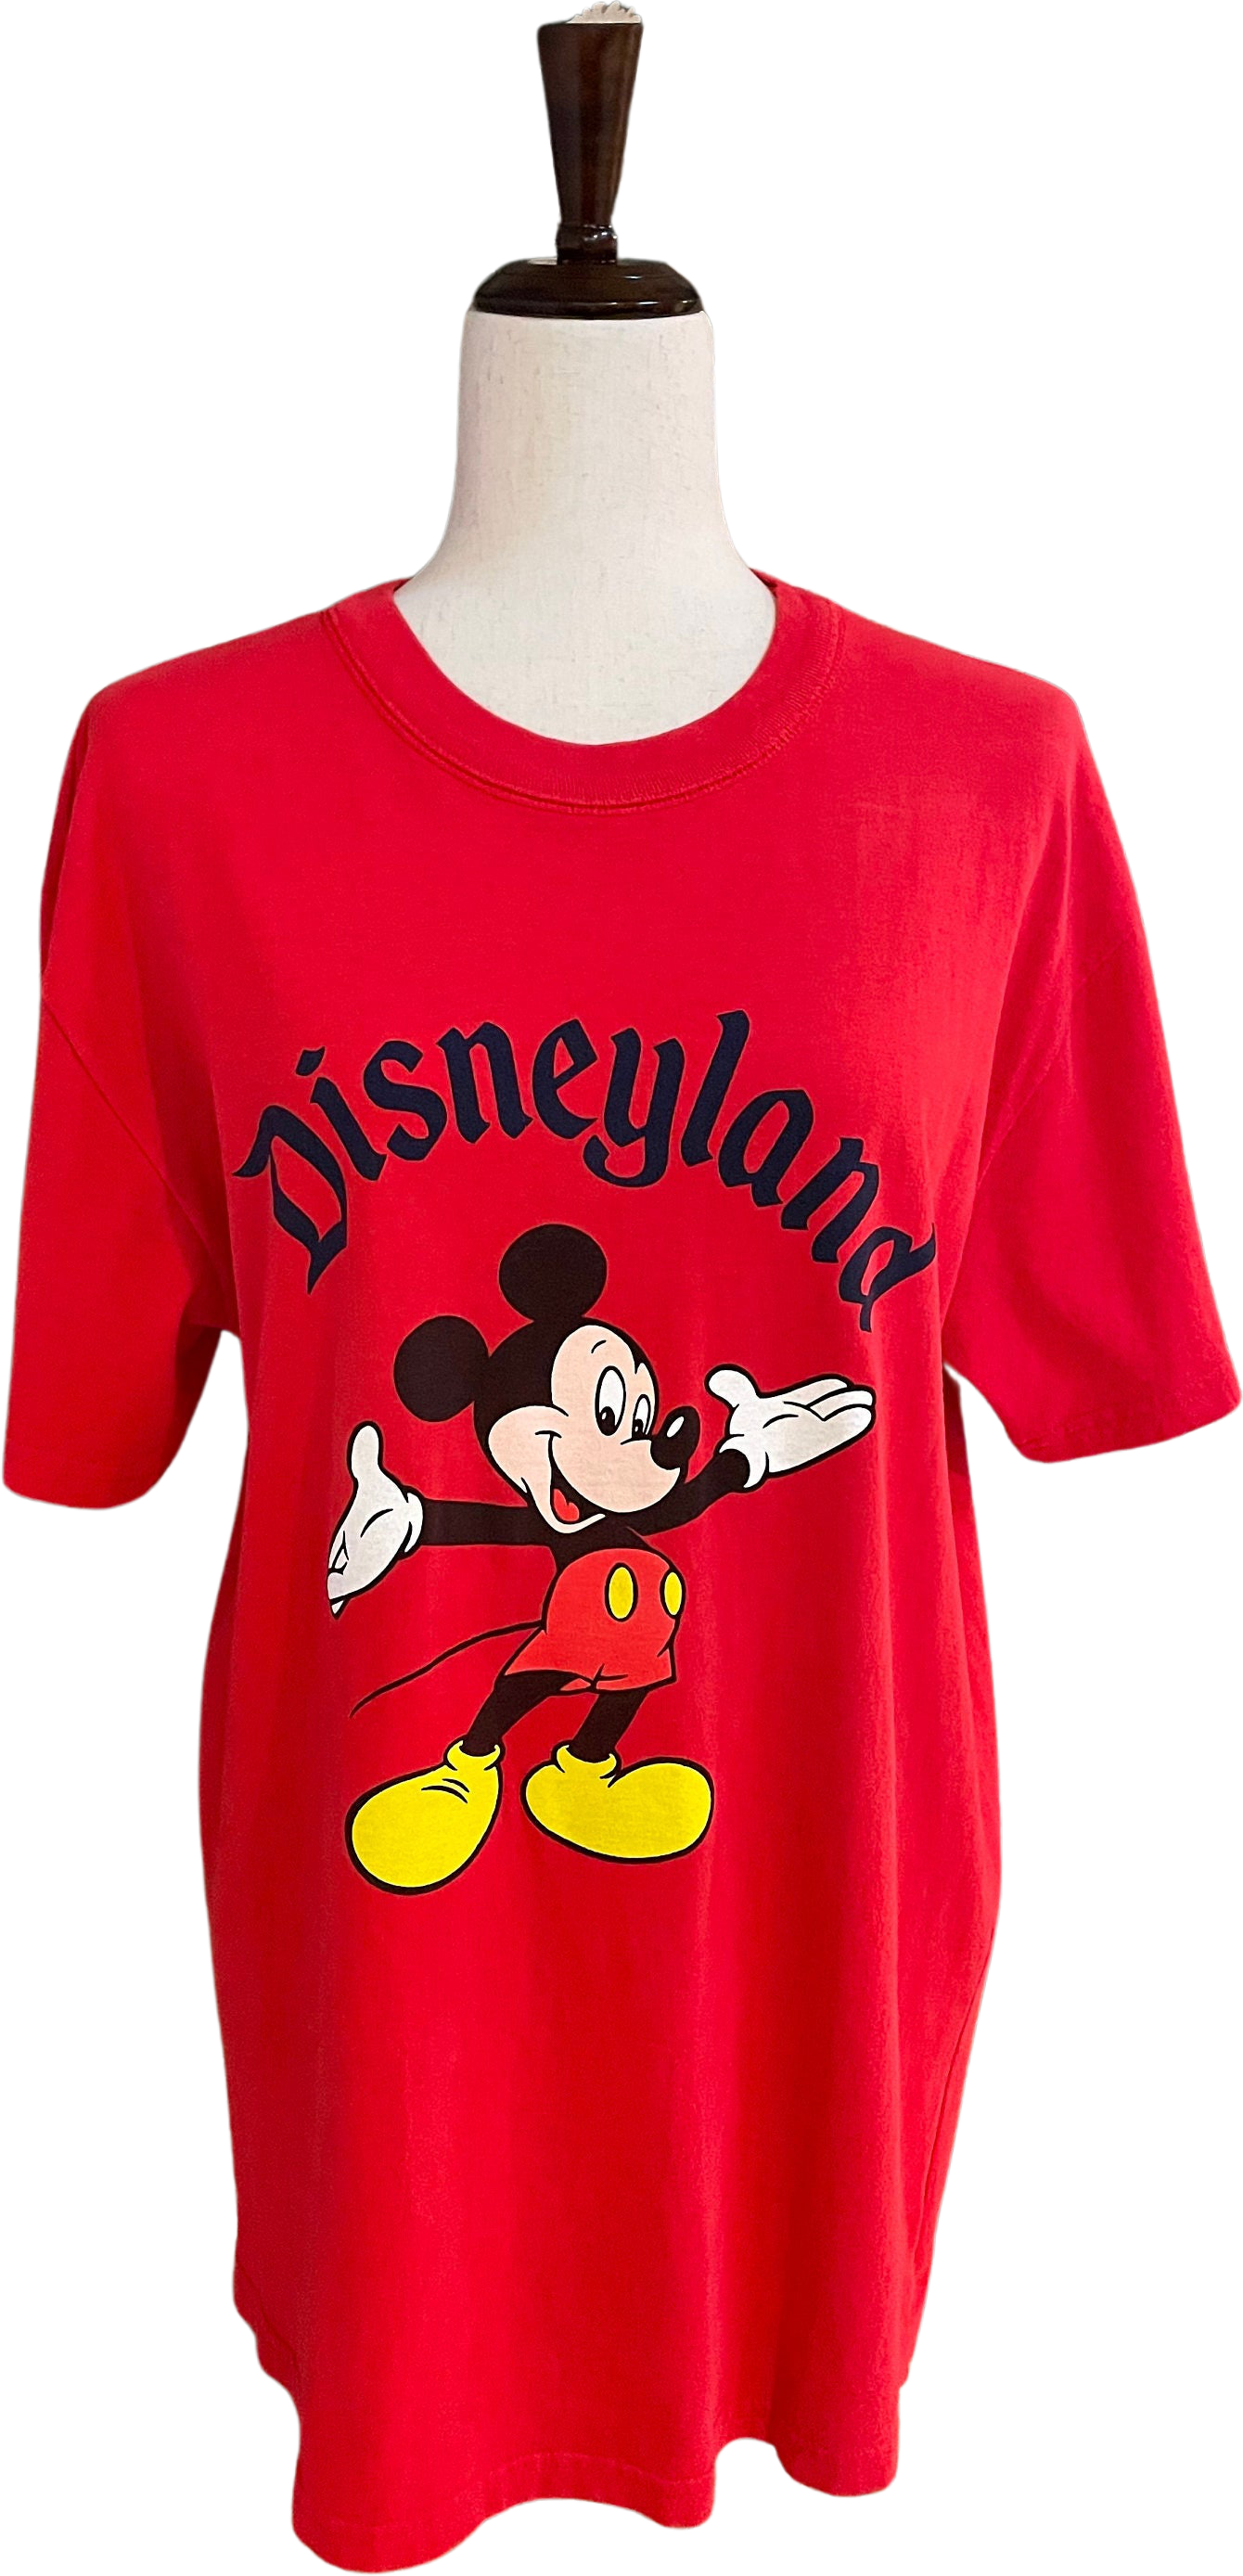 90's Vintage Mickey Mouse Disneyland T-Shirt by Disney